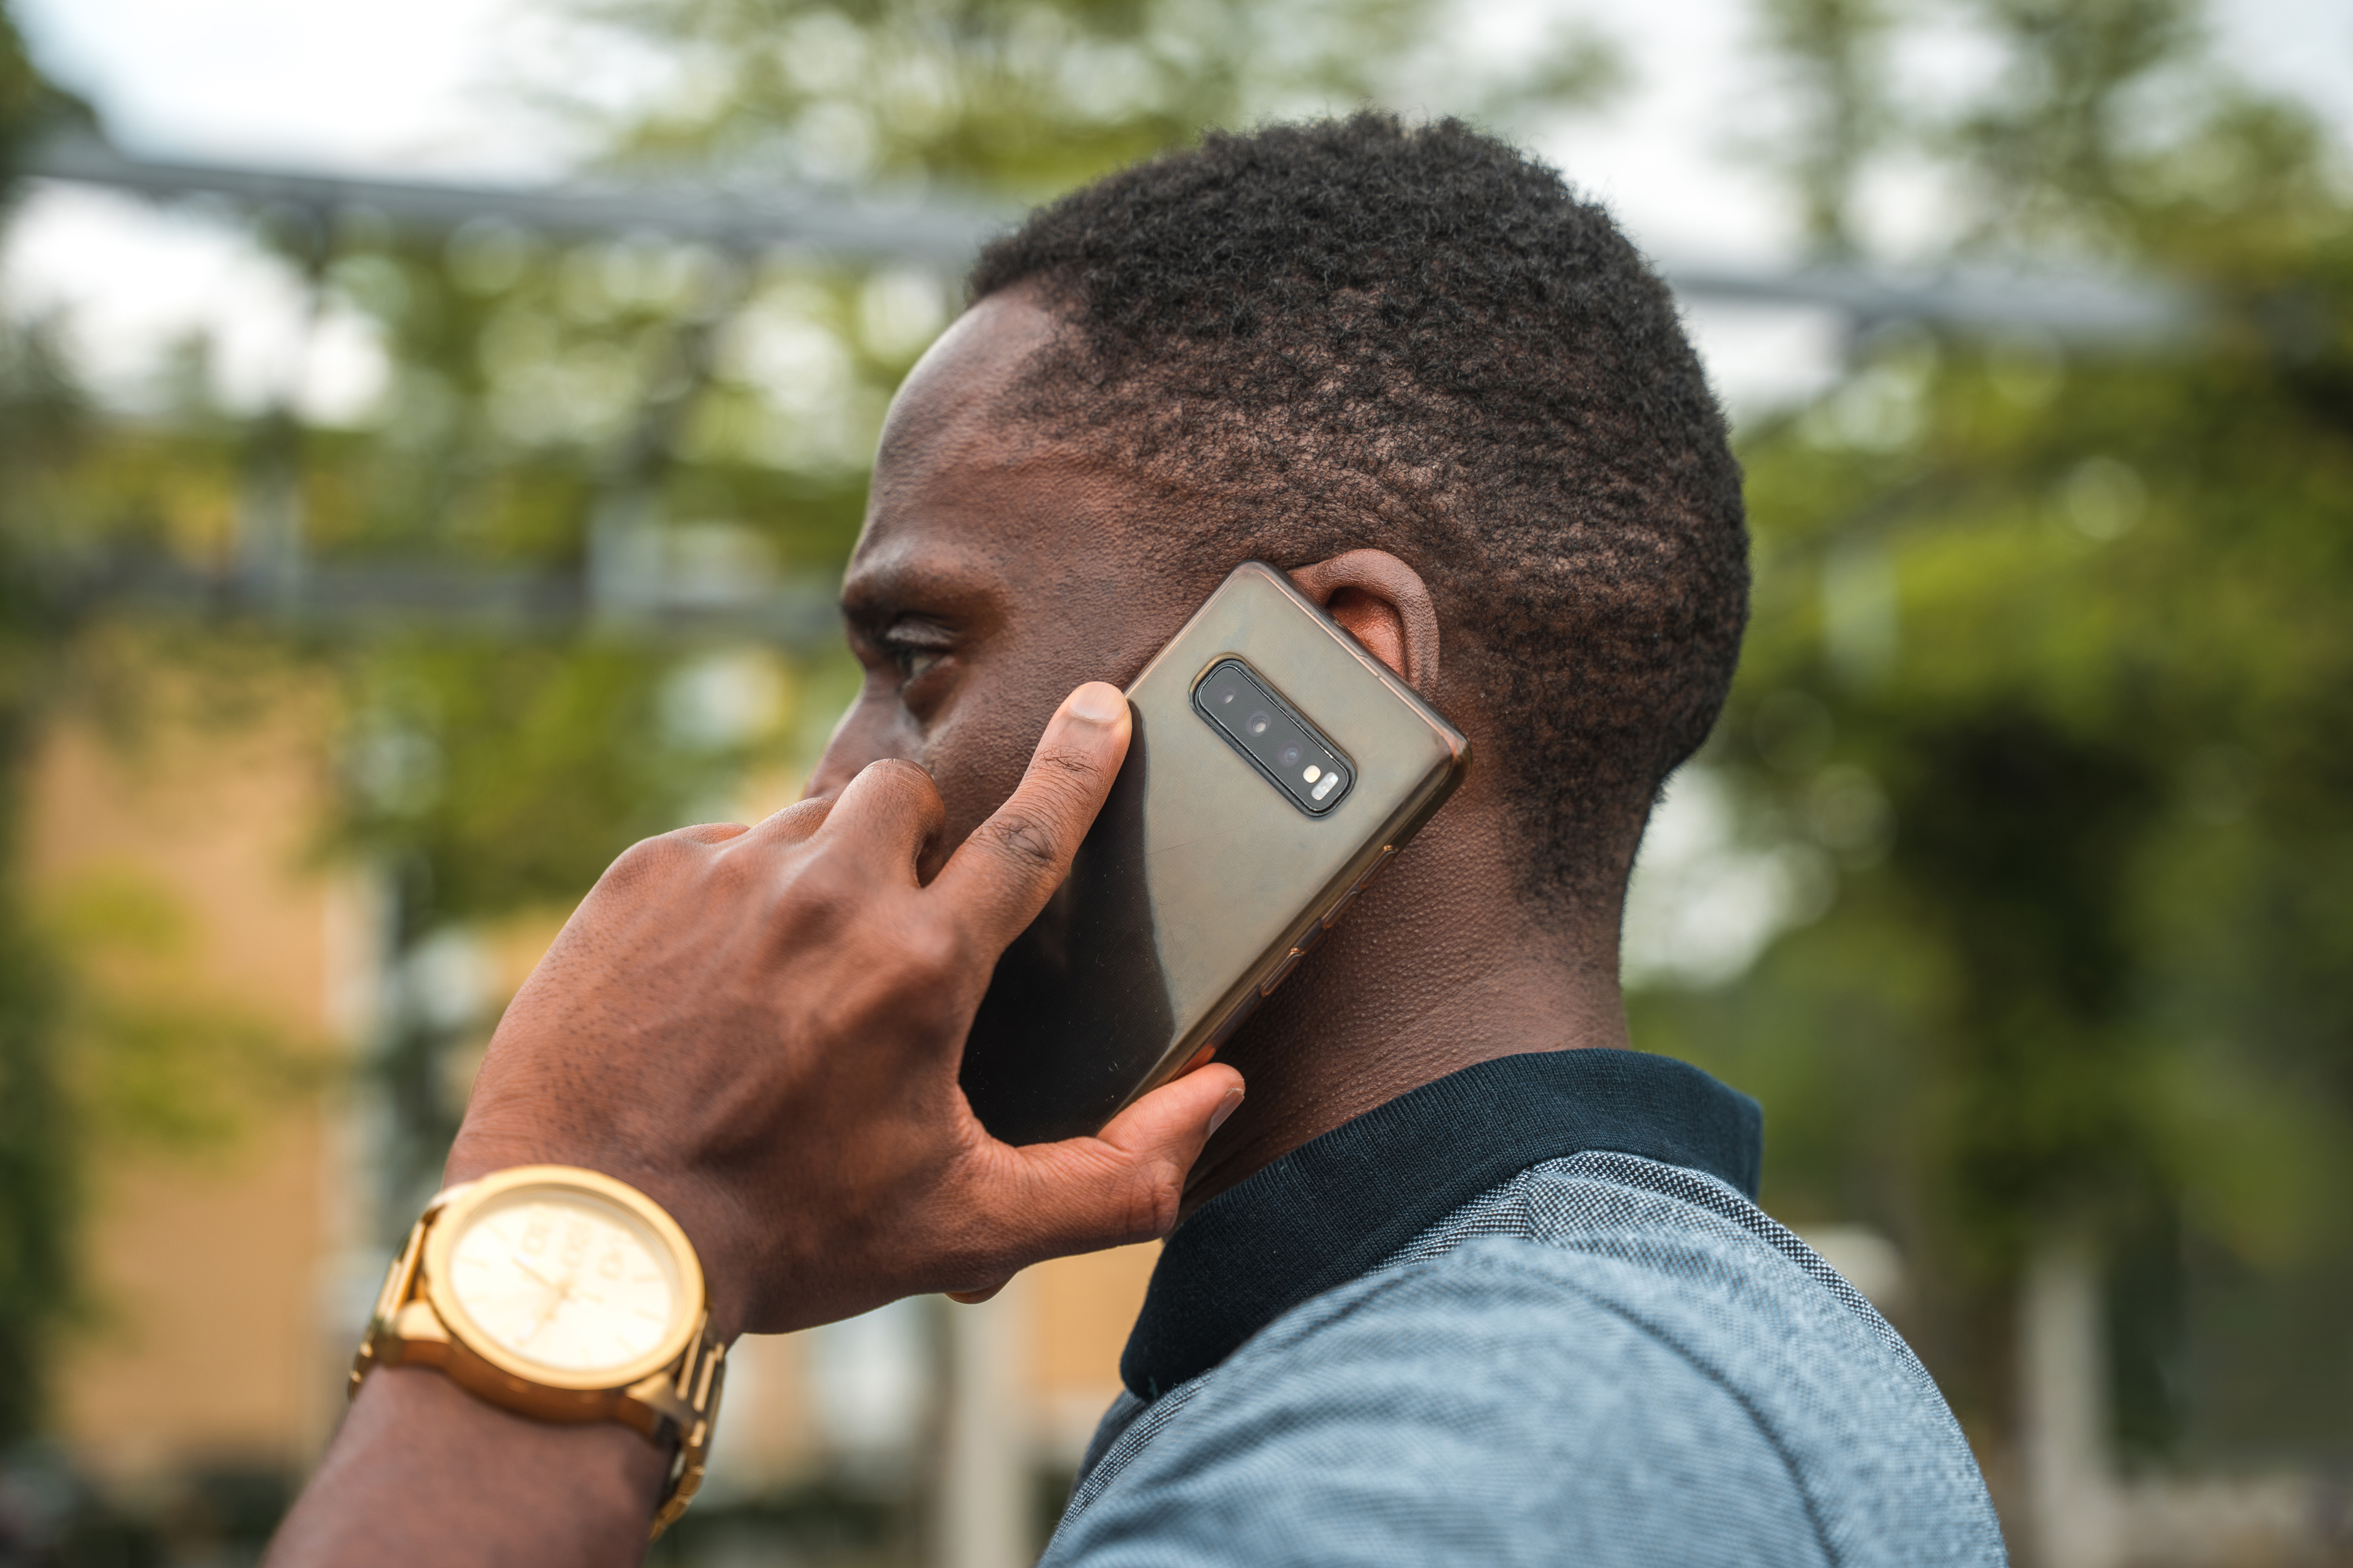 Person on a call using a smartphone, wearing a watch, focus on the hand and phone